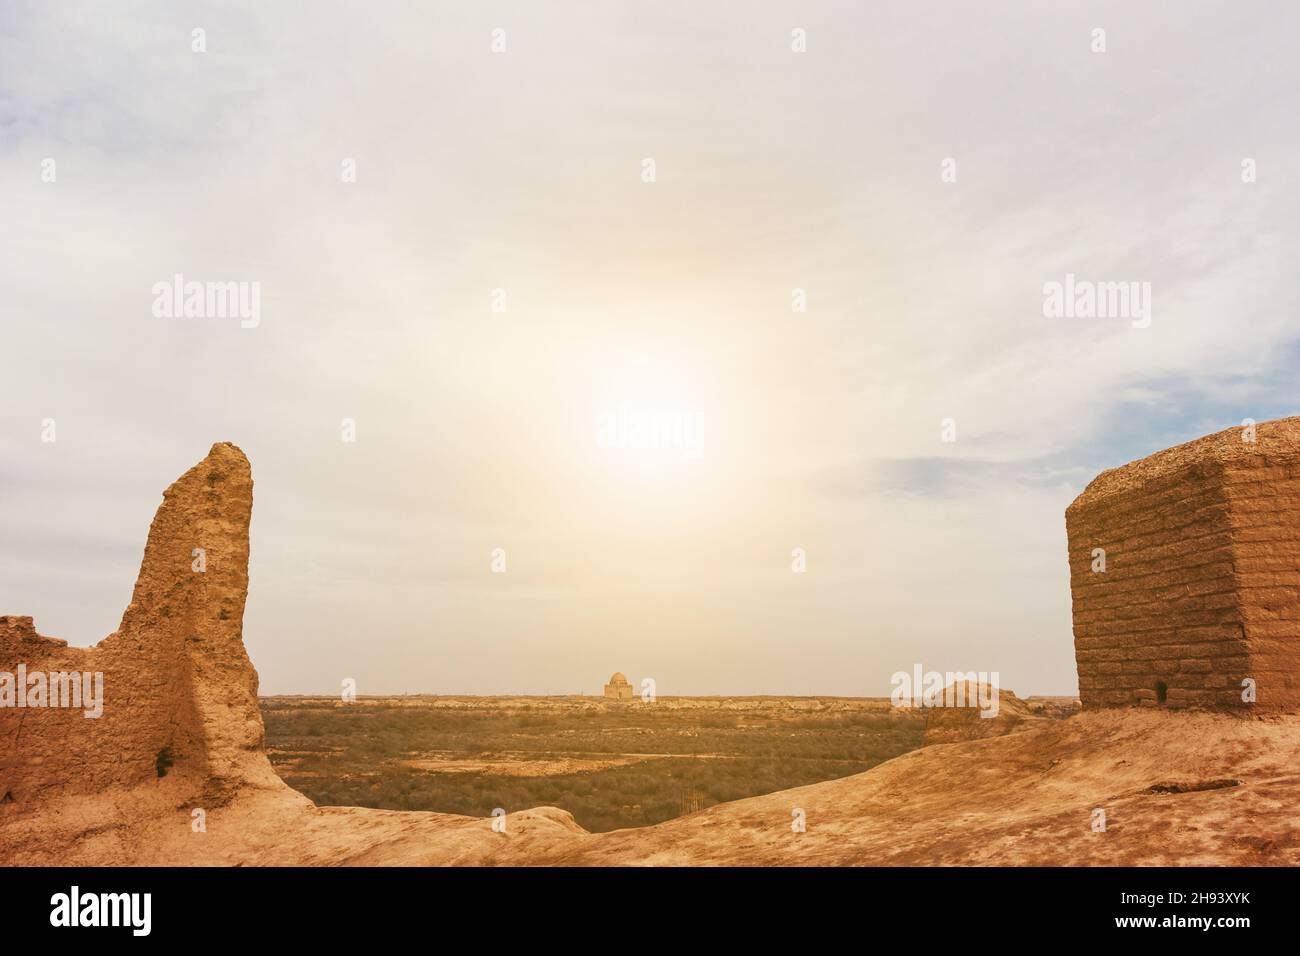 Landscape view of sultan Sanjar's tomb in Merv, Turkmenistan on a bright sunny day Stock Photo